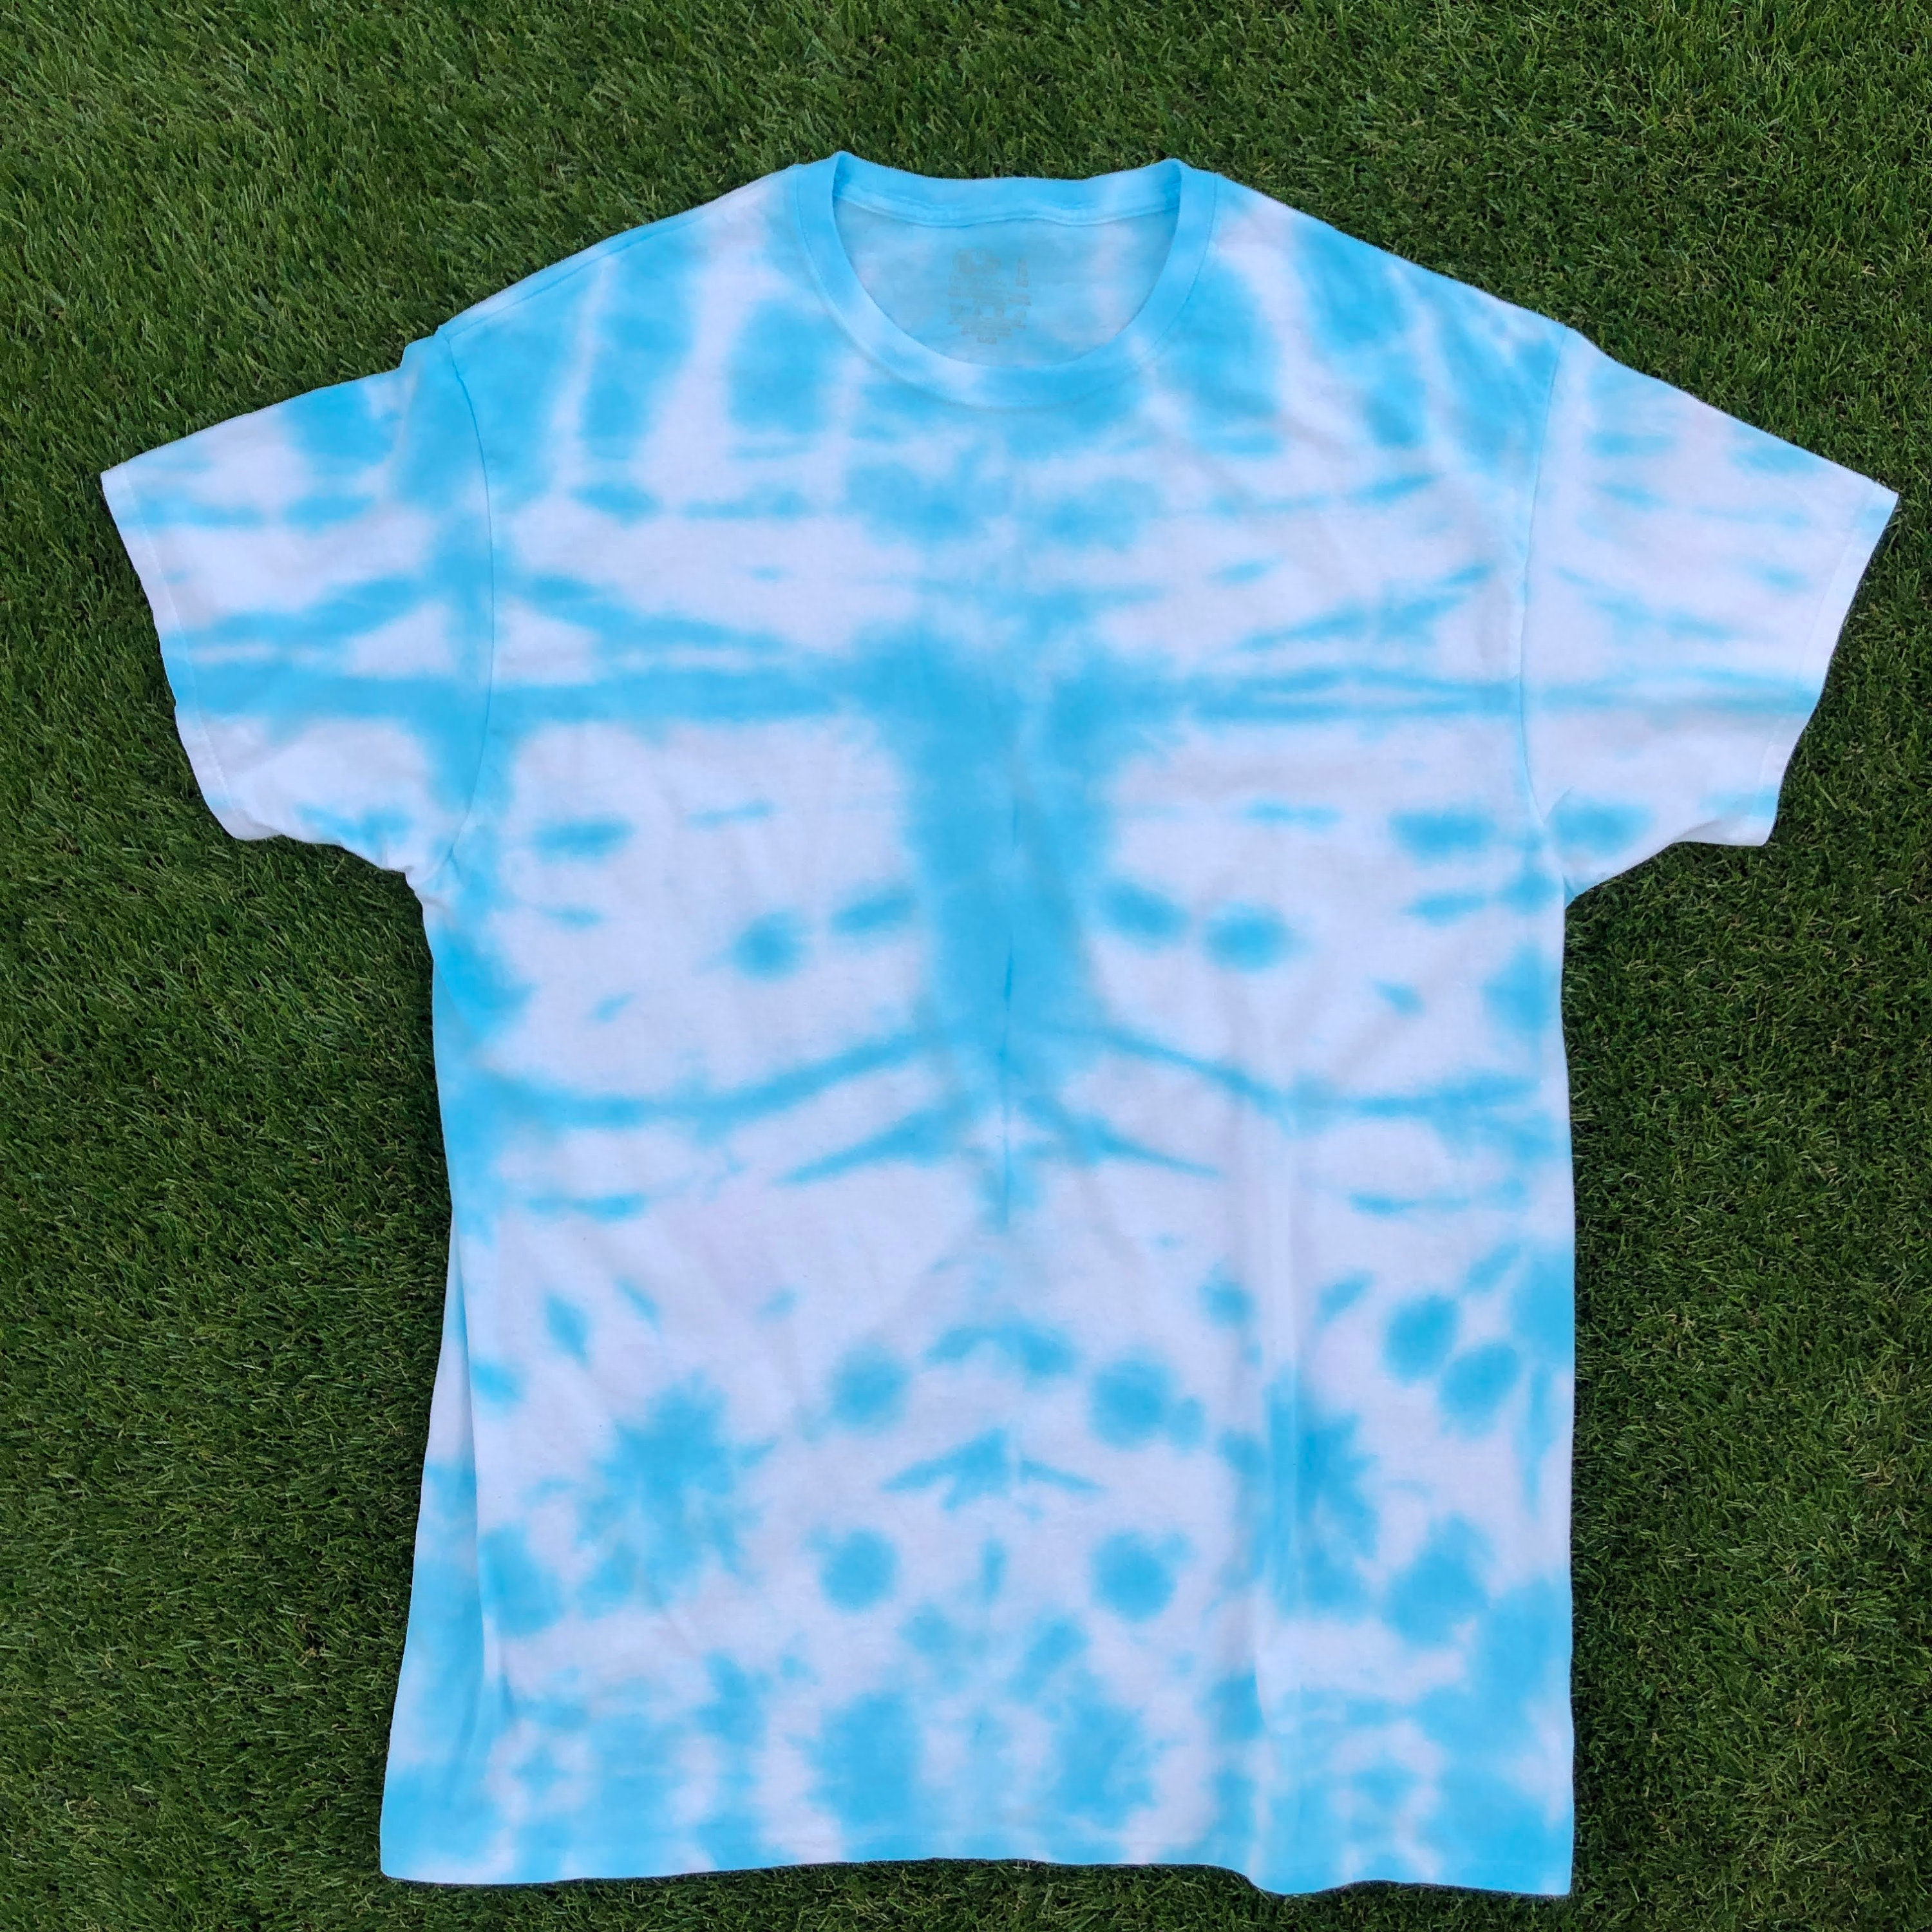 Hand Dyed T-Shirt Tie Dye Pastel Light Color Teal Light | Etsy